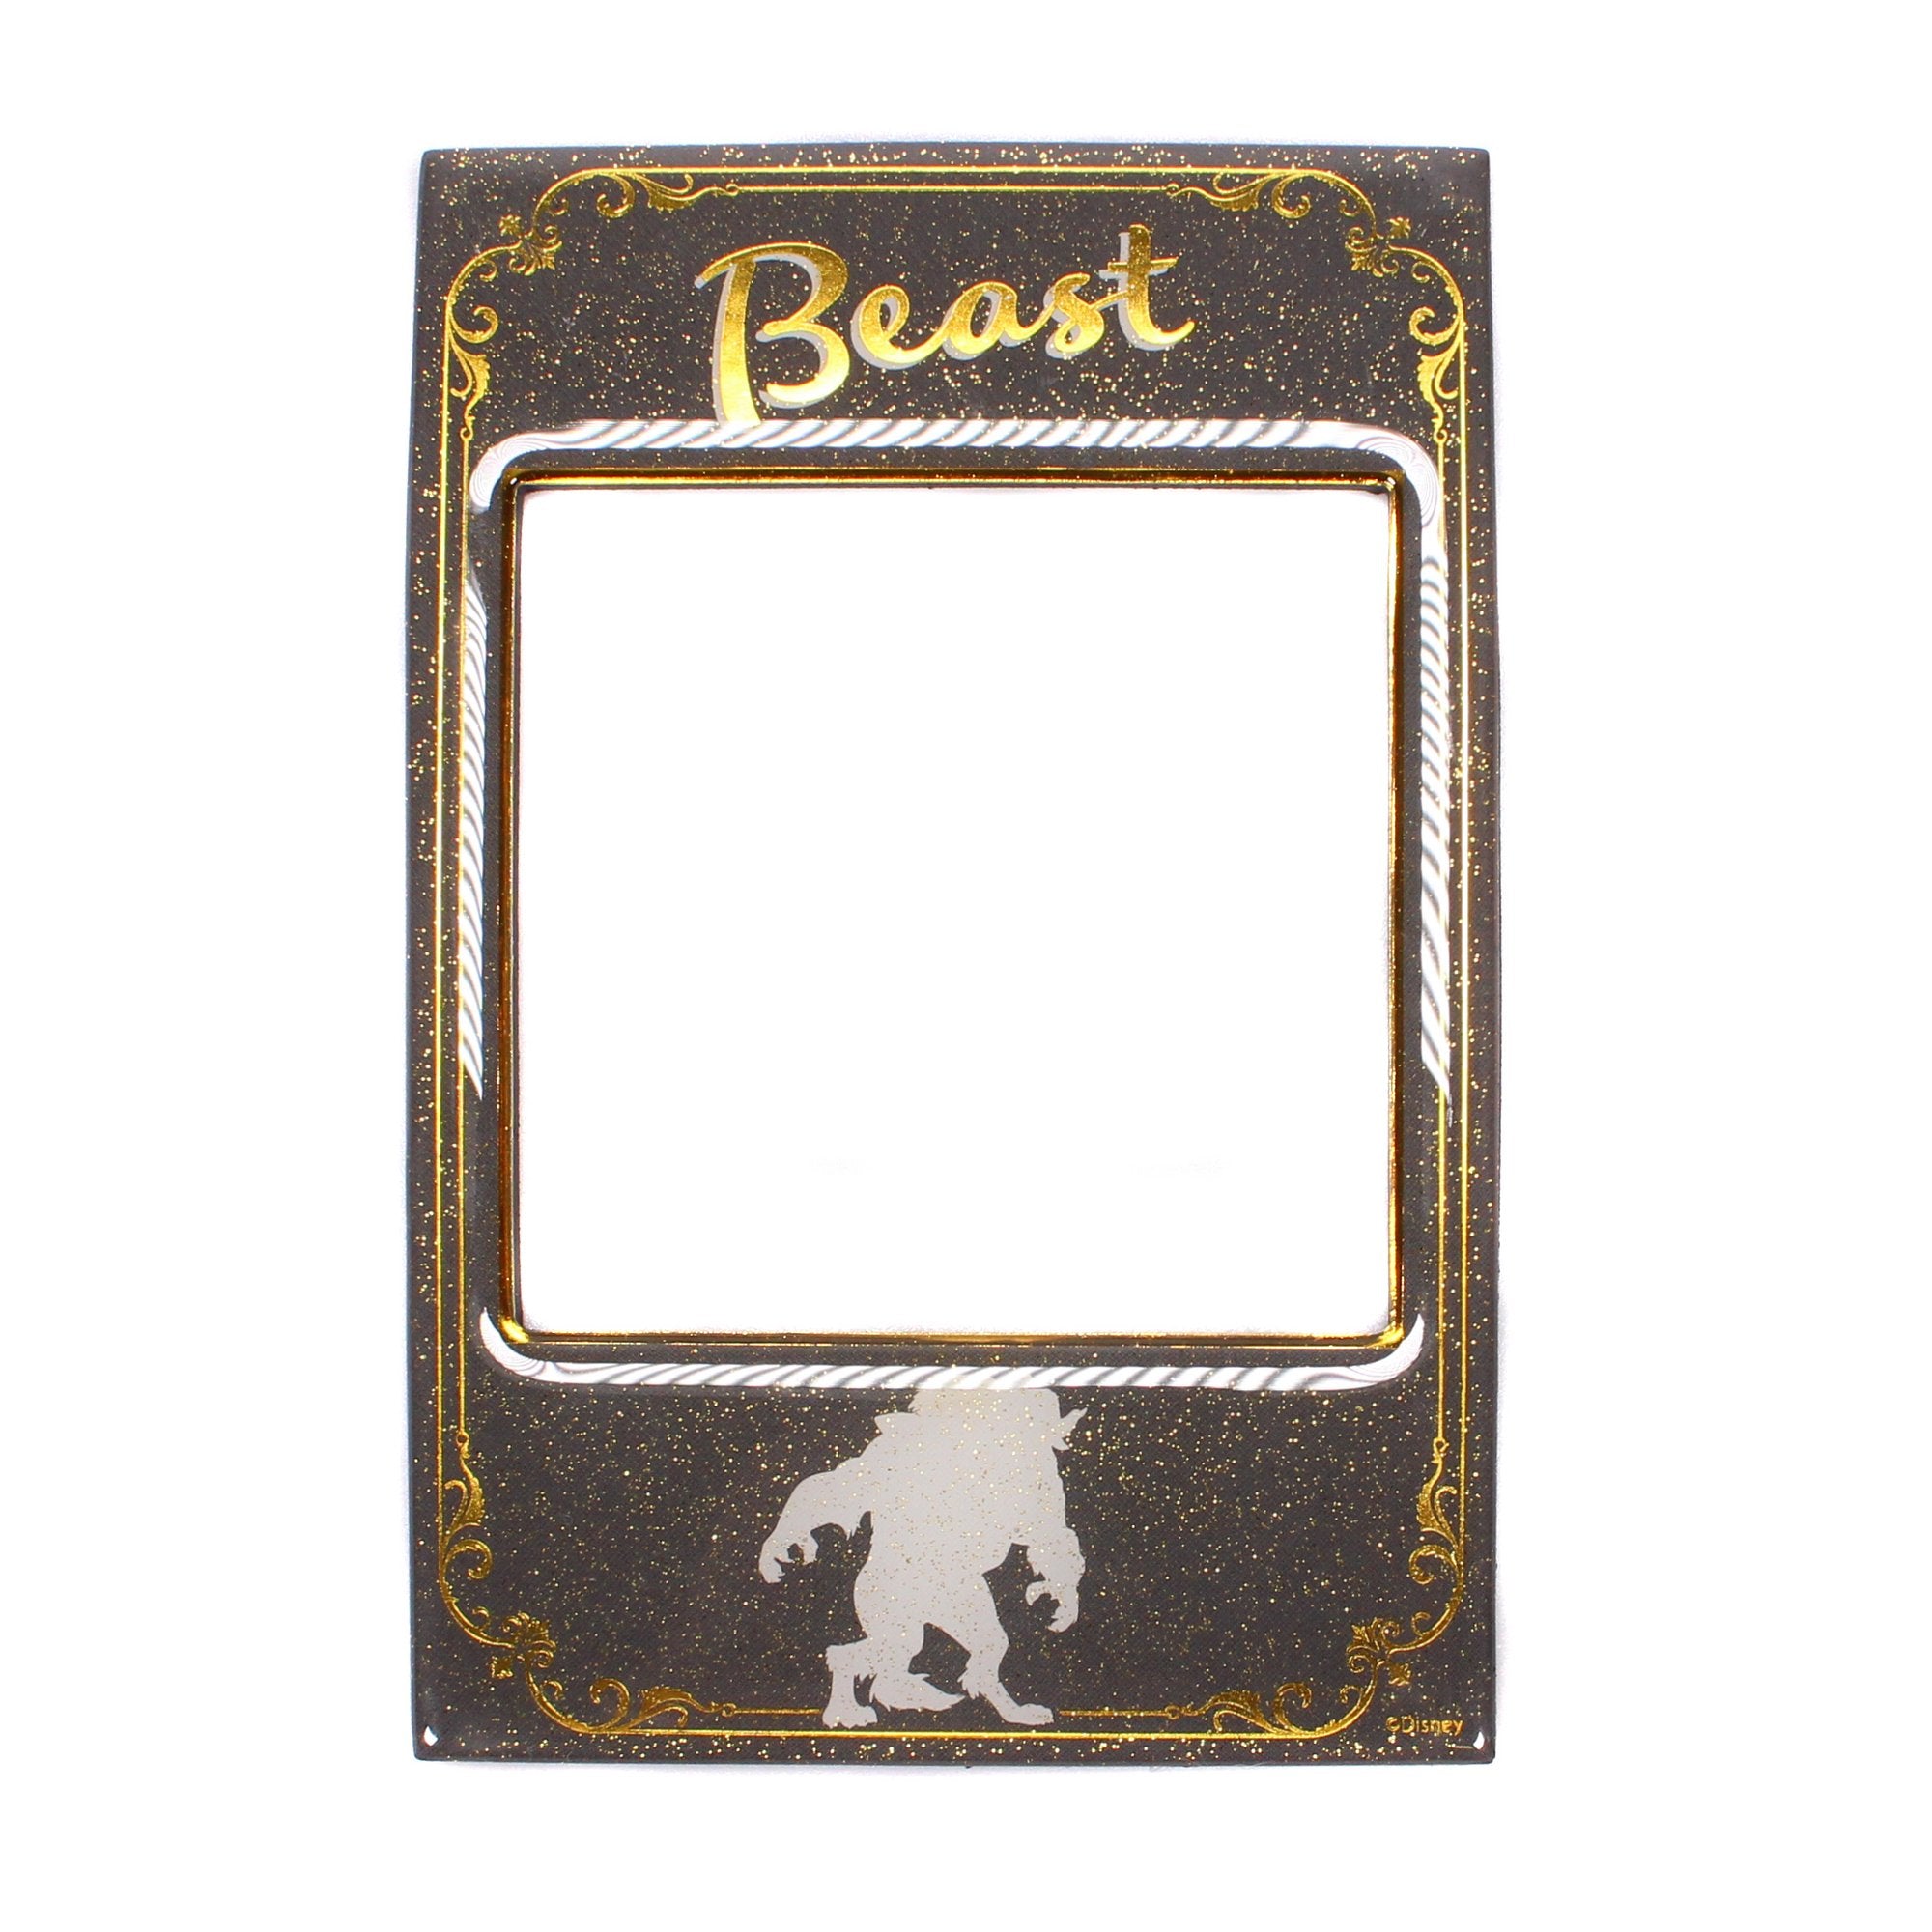 Beauty and the Beast Set of 2 Photo Frame Magnets